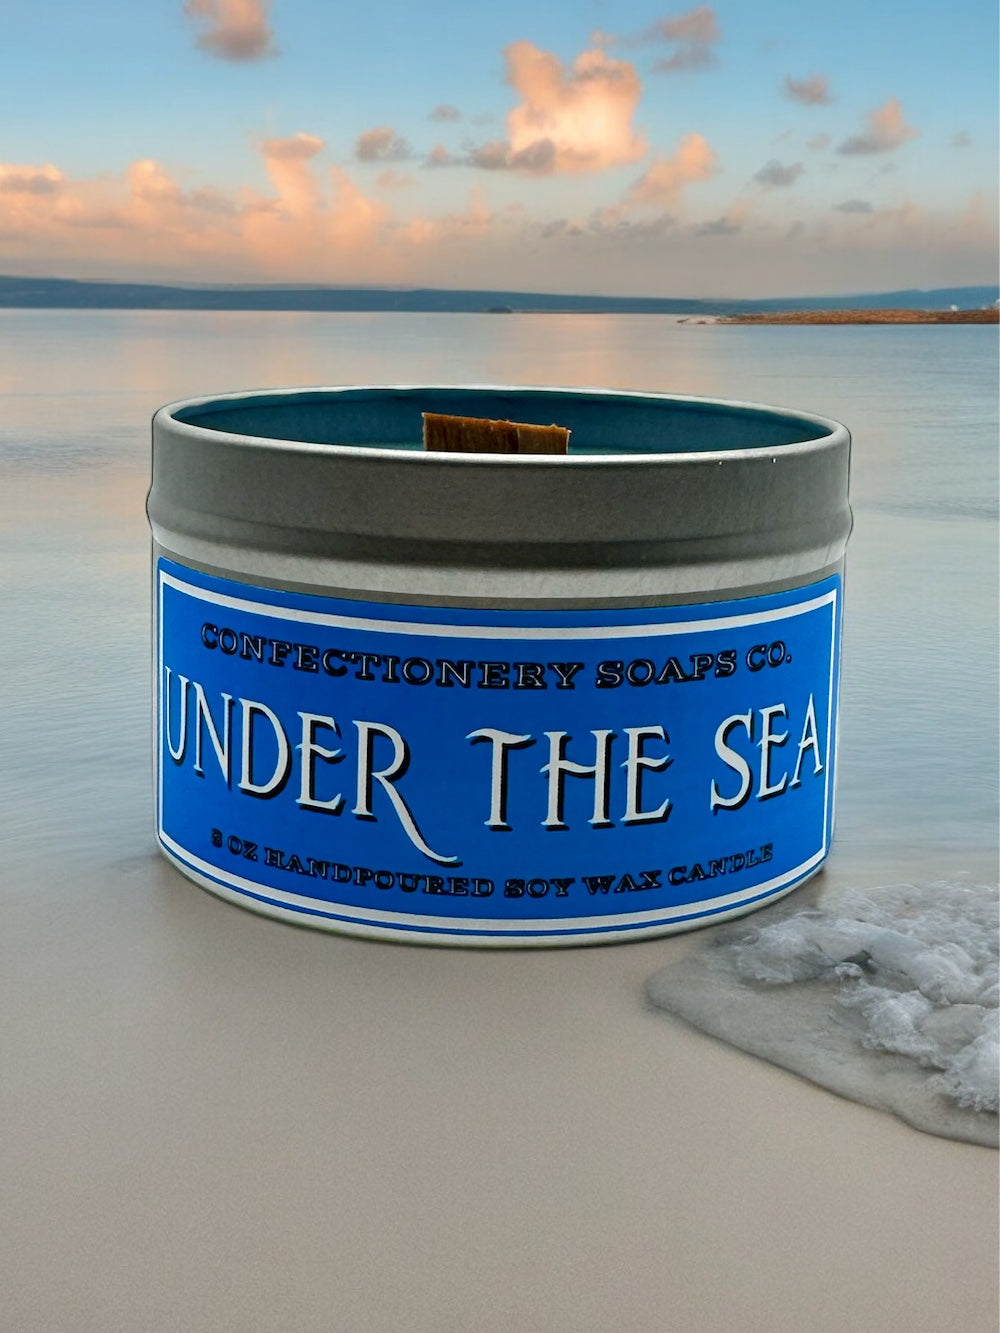 Under the Sea CSC Signature Candle